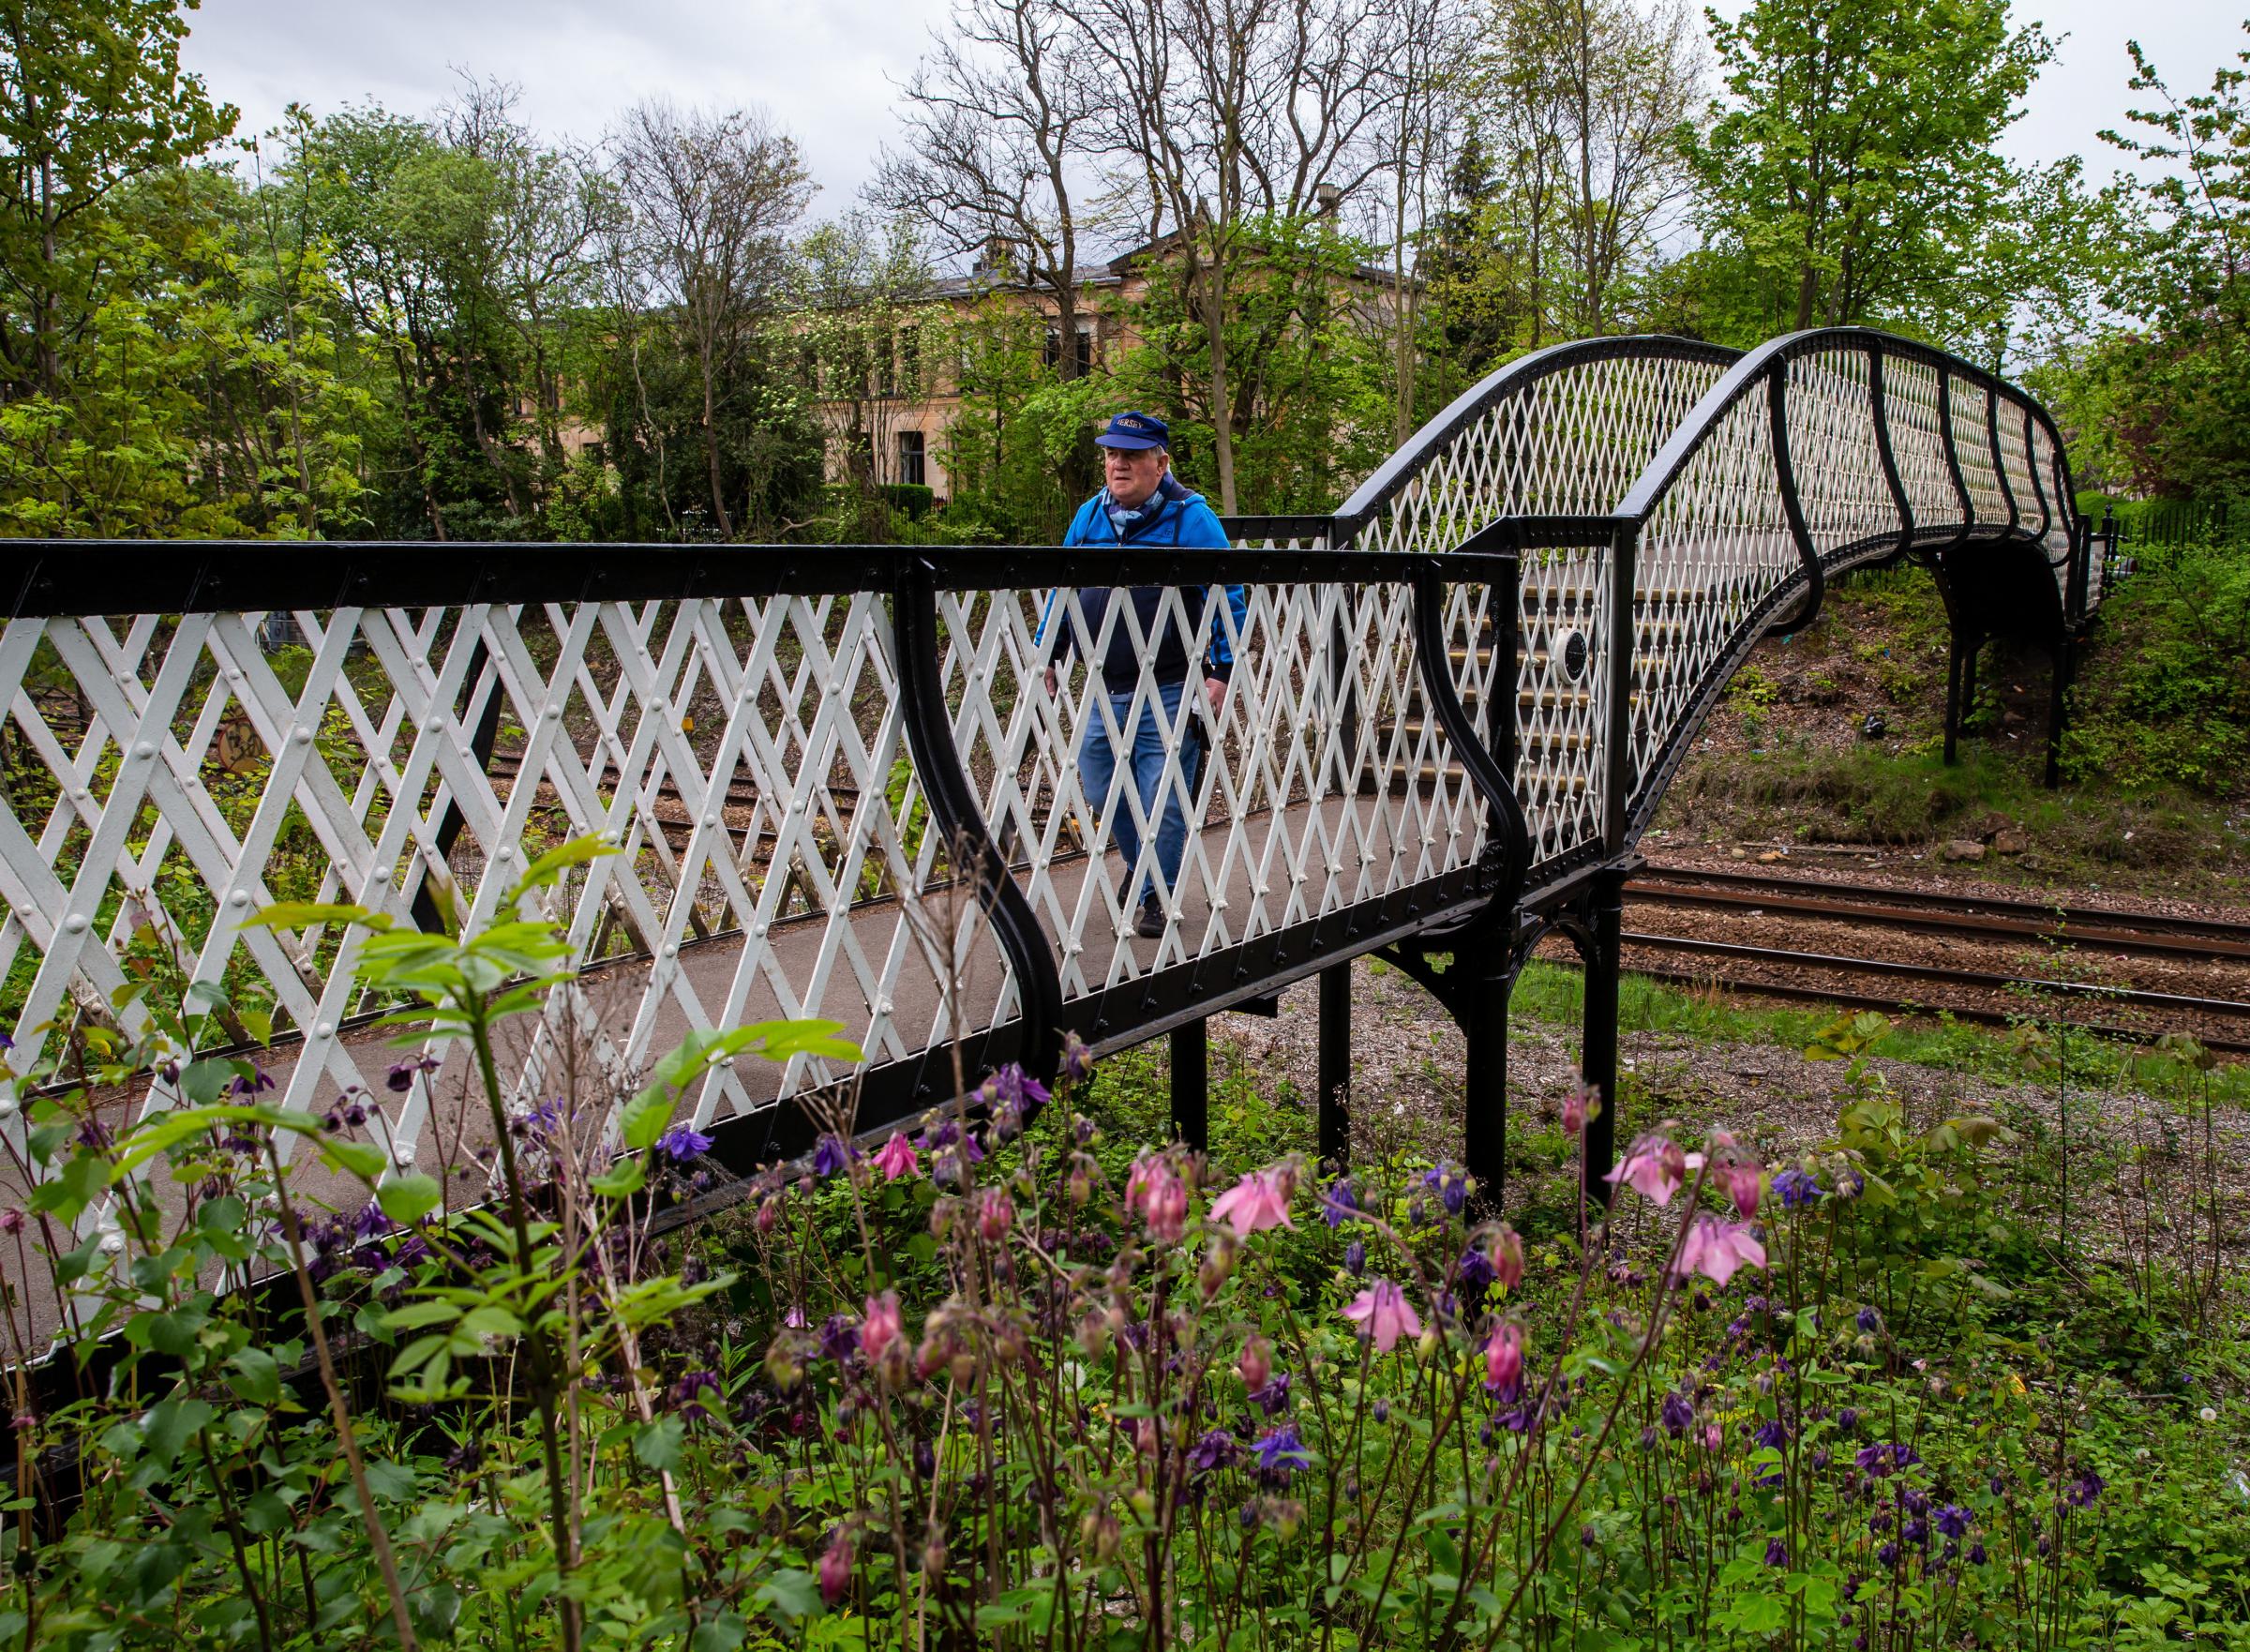 Strathbungo footbridge that connects Darnley Road and Moray Place in Strathbungo over a railway line Picture: Colin Mearns